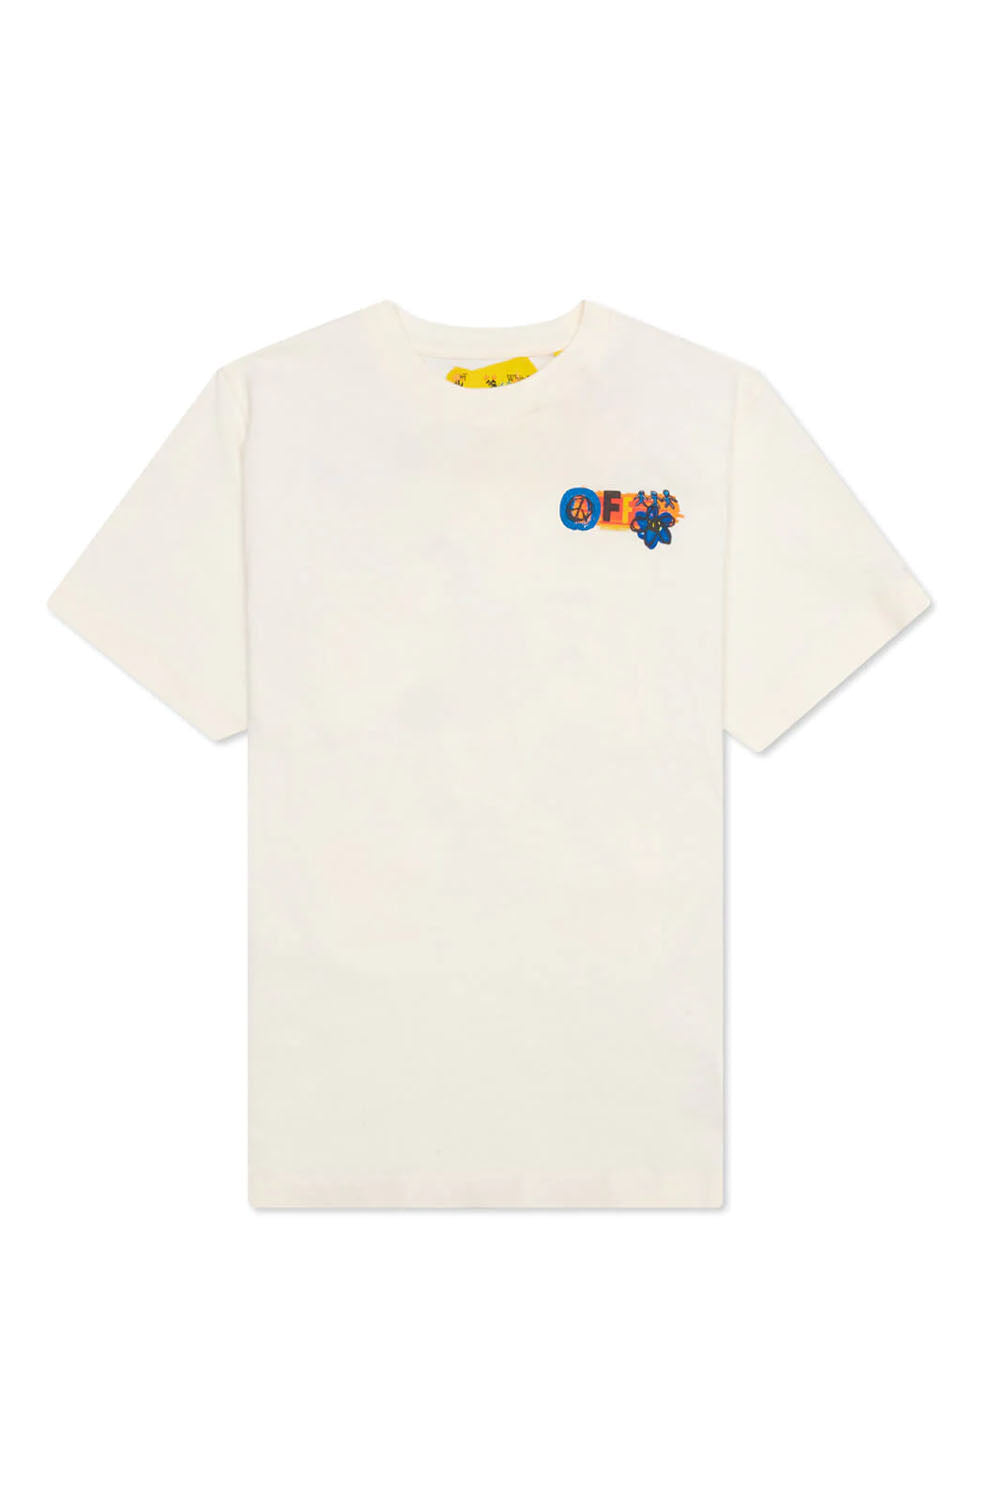 Ow Together T-Shirt for Boys